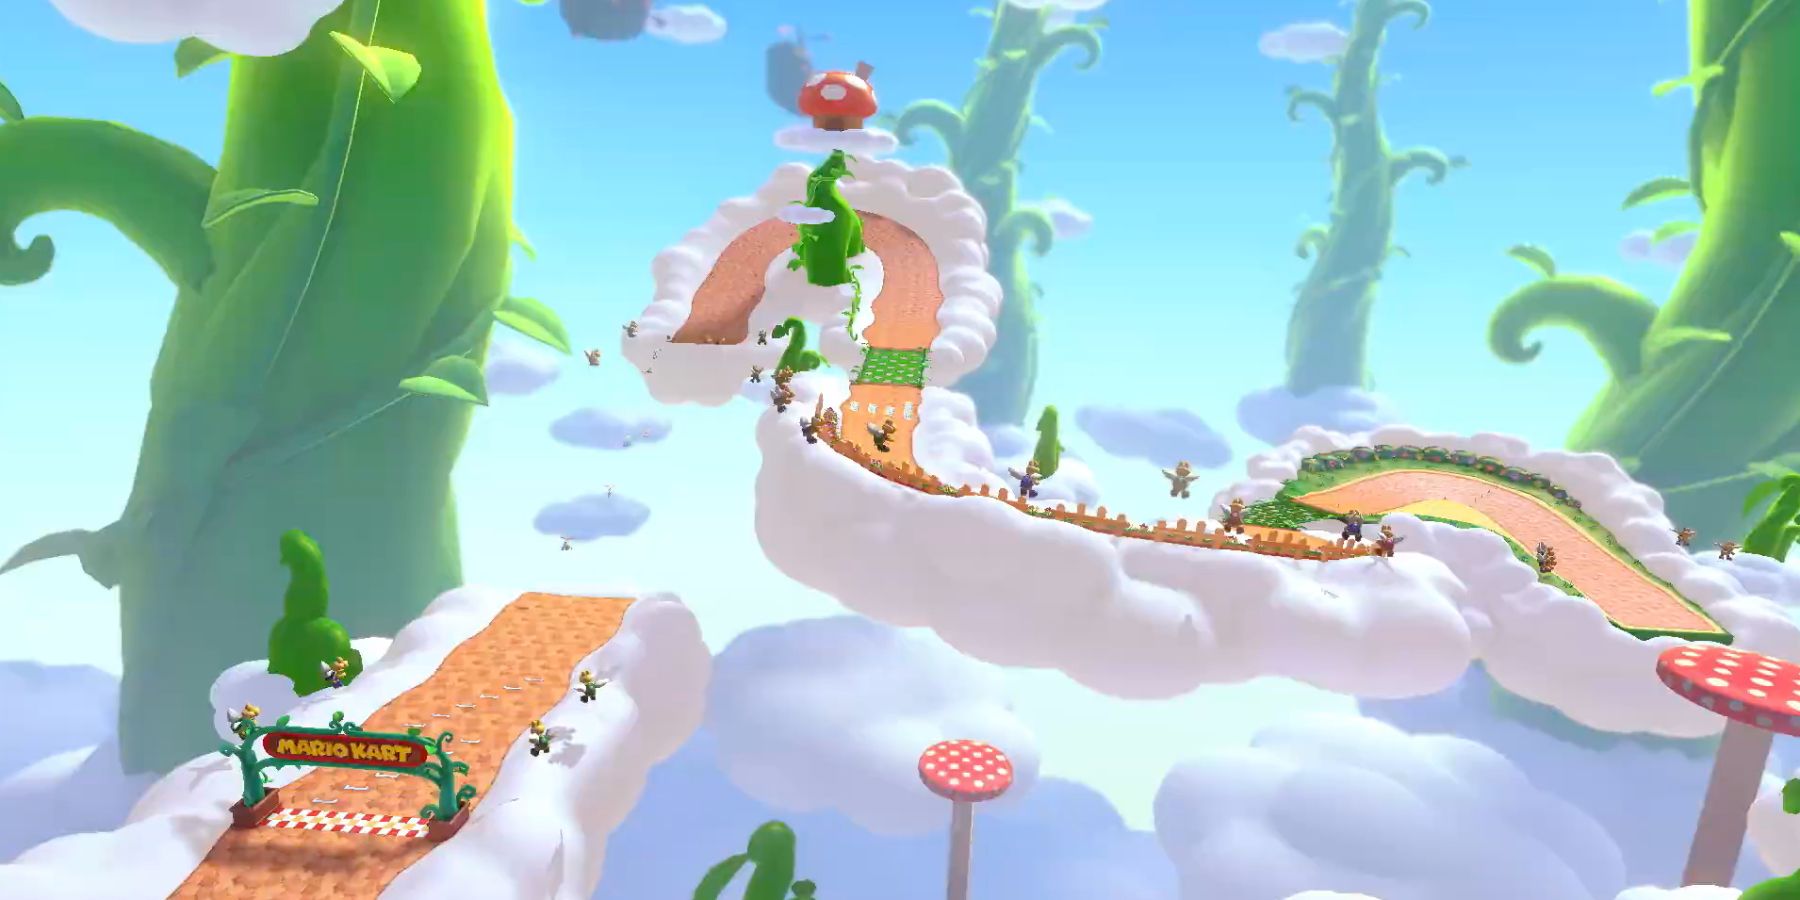 Sky Garden has some neat shortcut opportunities in Mario Kart 8, but its verticality reminds of the lack of anti-gravity sections